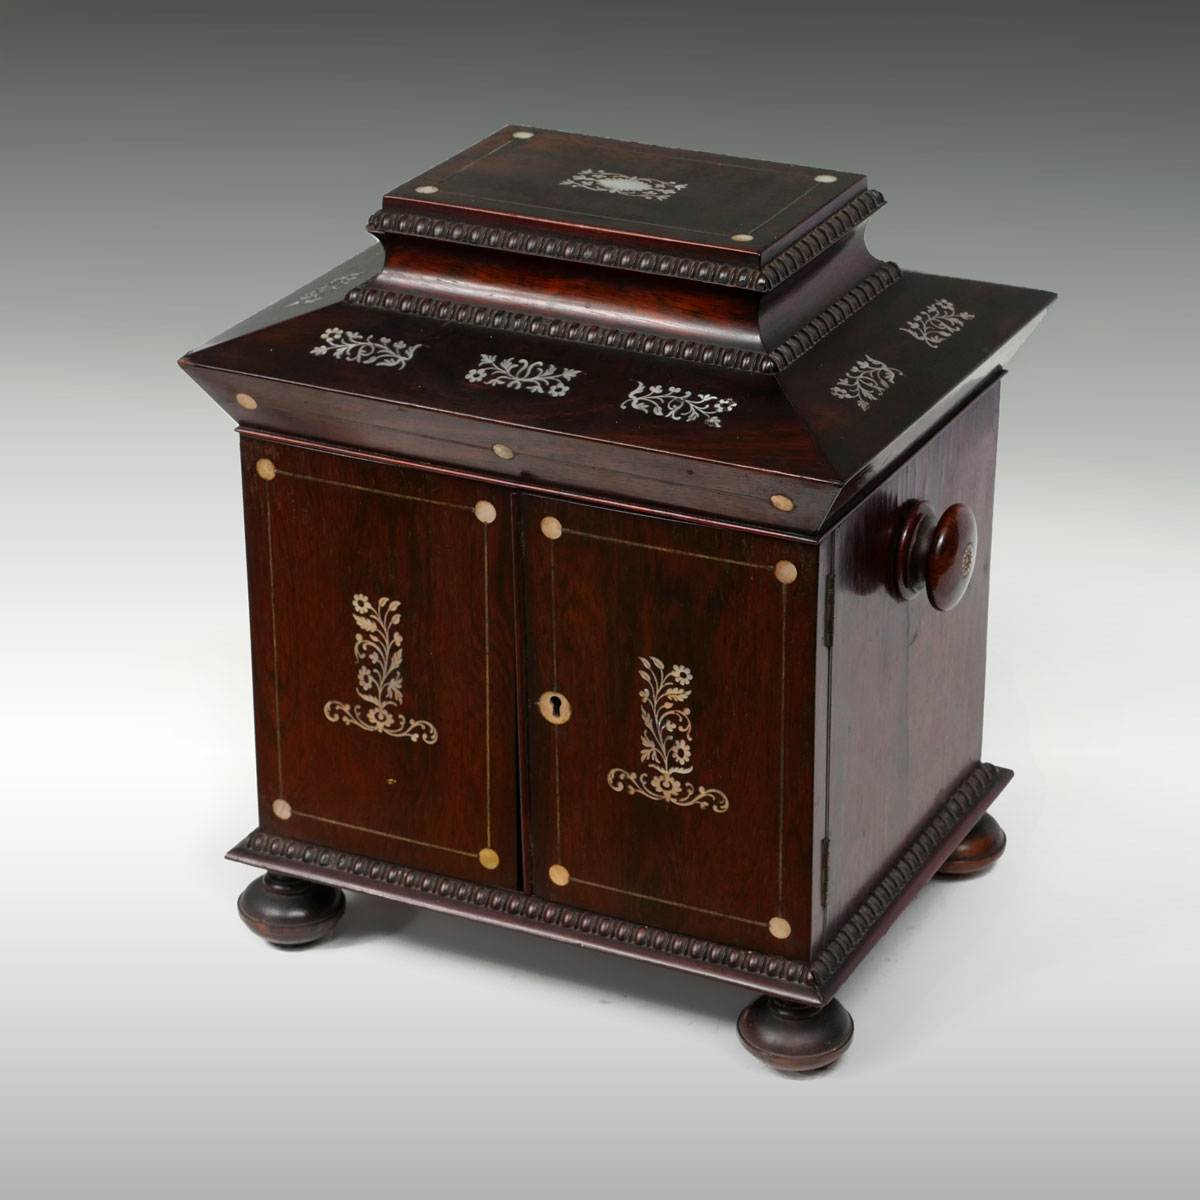 INLAID 3 DRAWER CHEST WITH DESK: